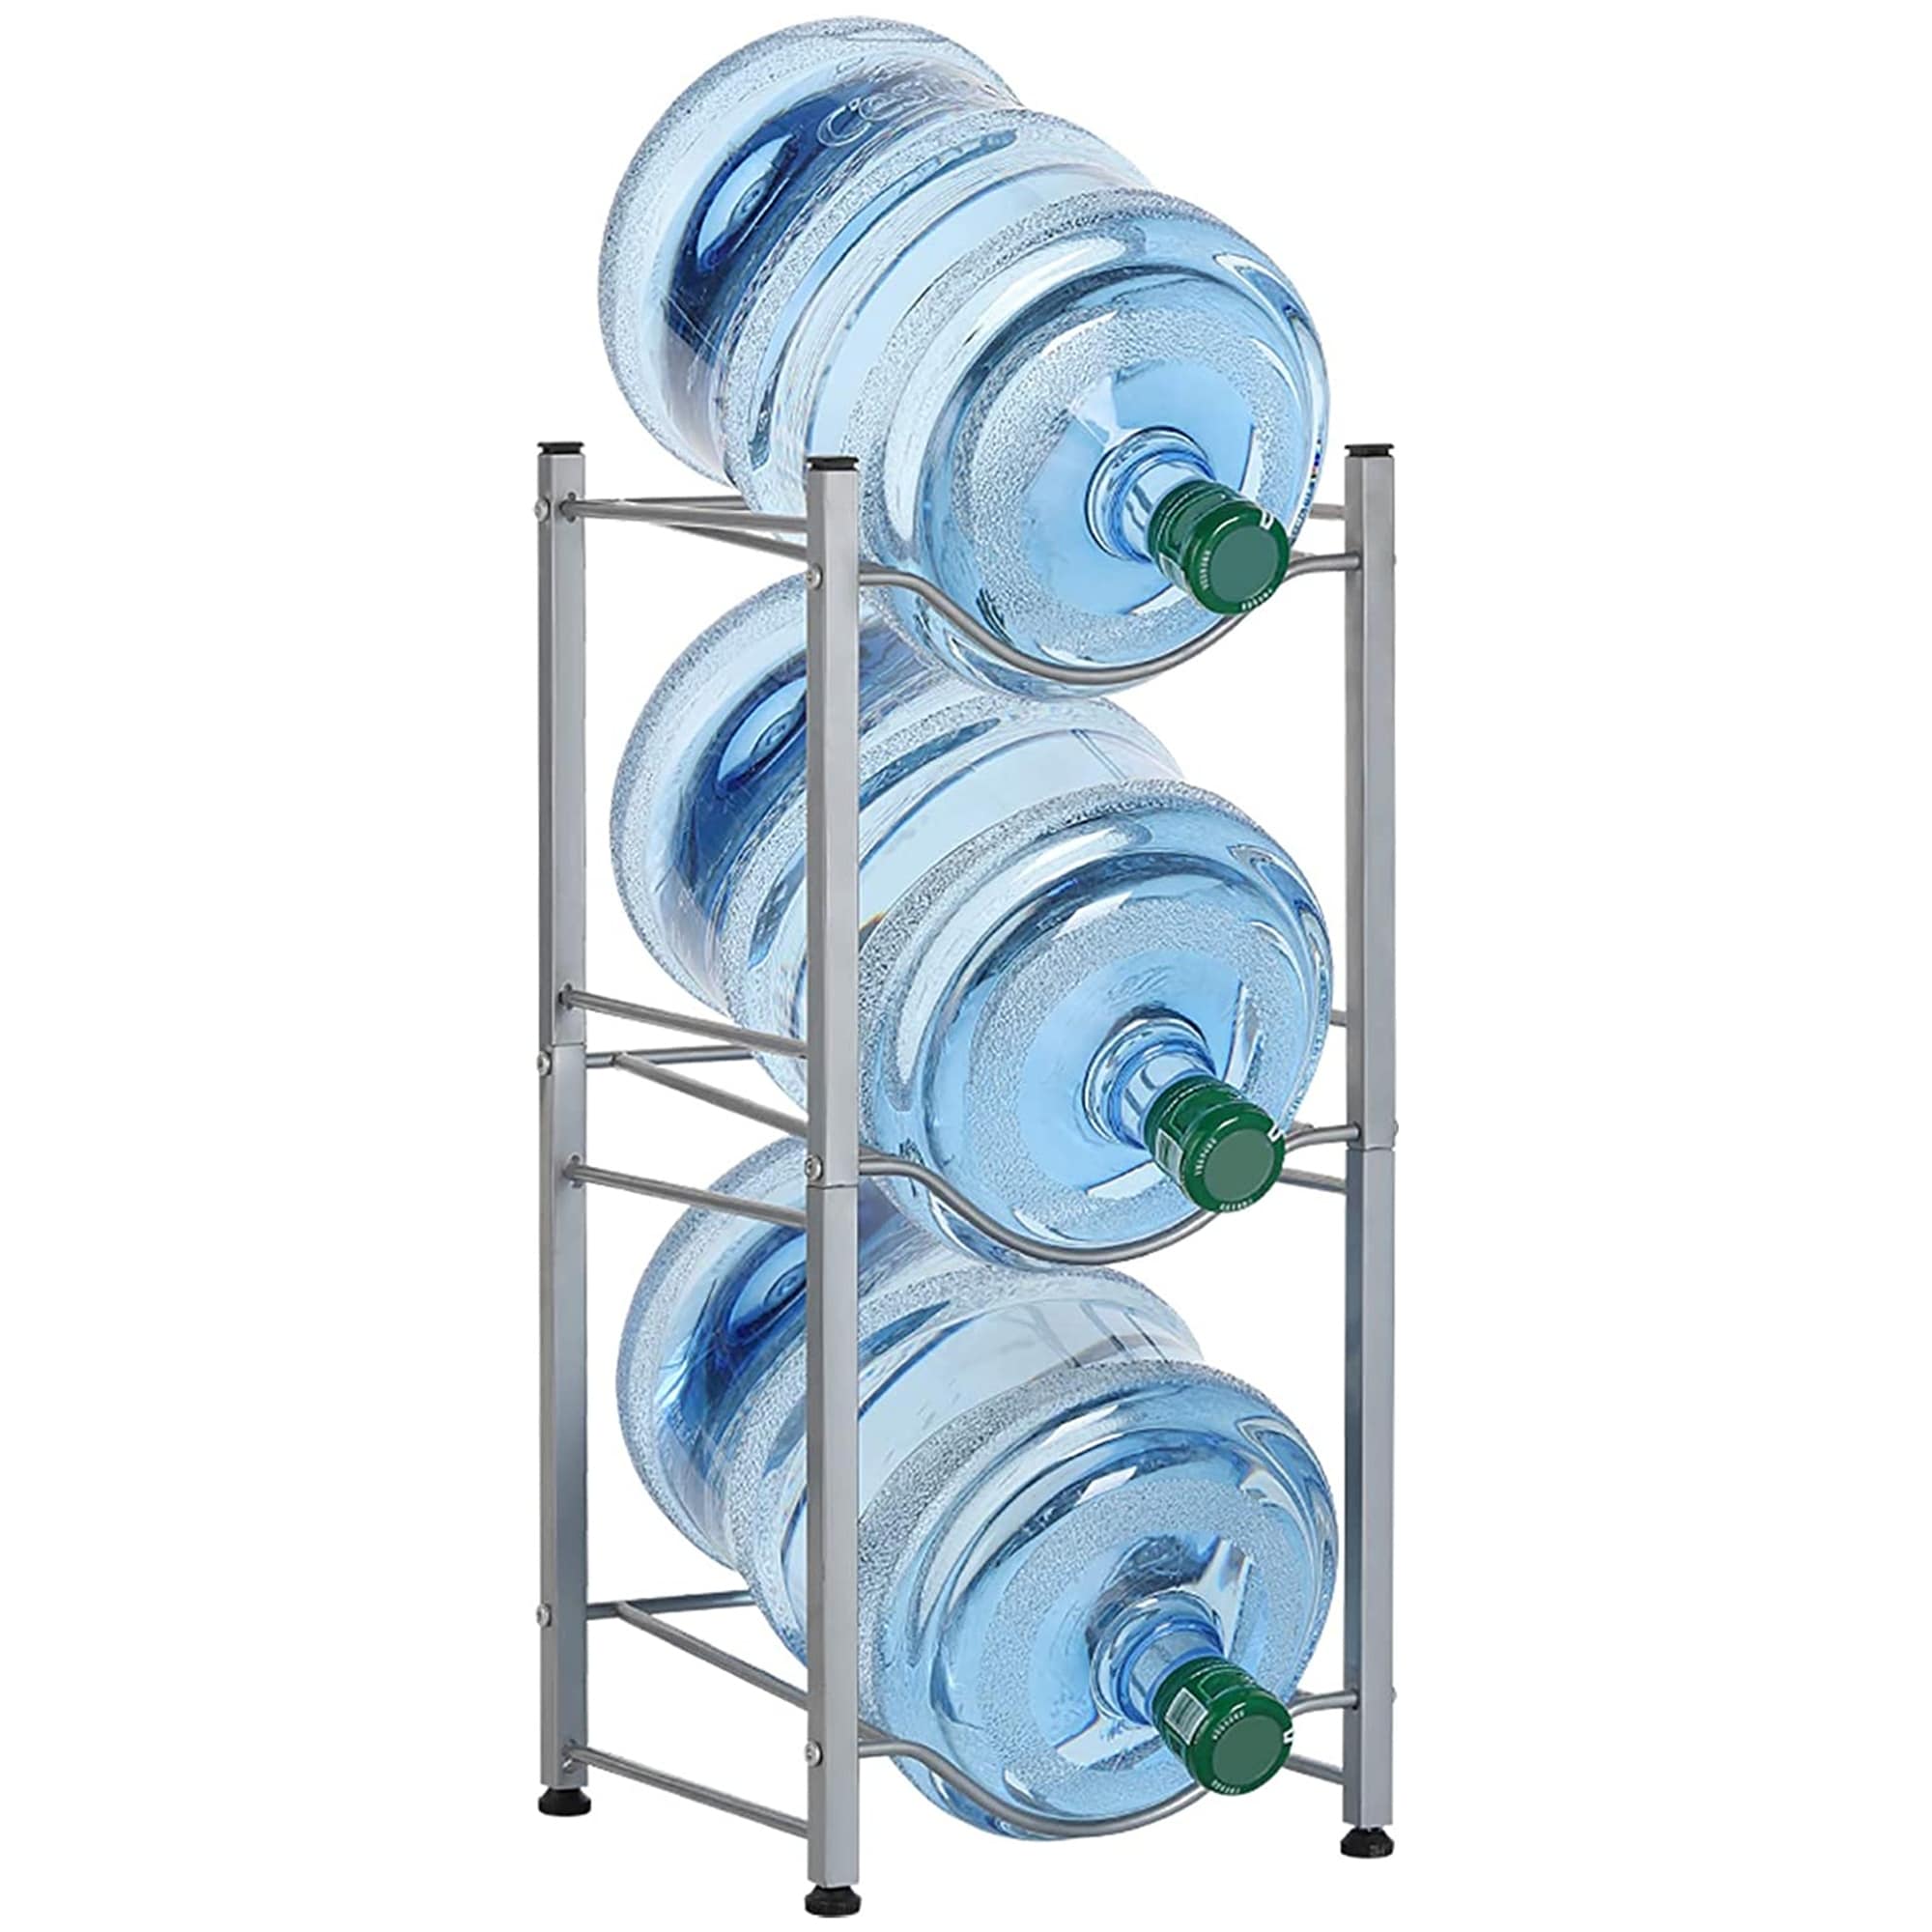 https://ak1.ostkcdn.com/images/products/is/images/direct/63e060657b6a17935cce59ab9935fb3fa91c9519/5-Gallon-Water-Jug-Holder-Water-Bottle-Storage-Rack%2C-3-Tiers.jpg